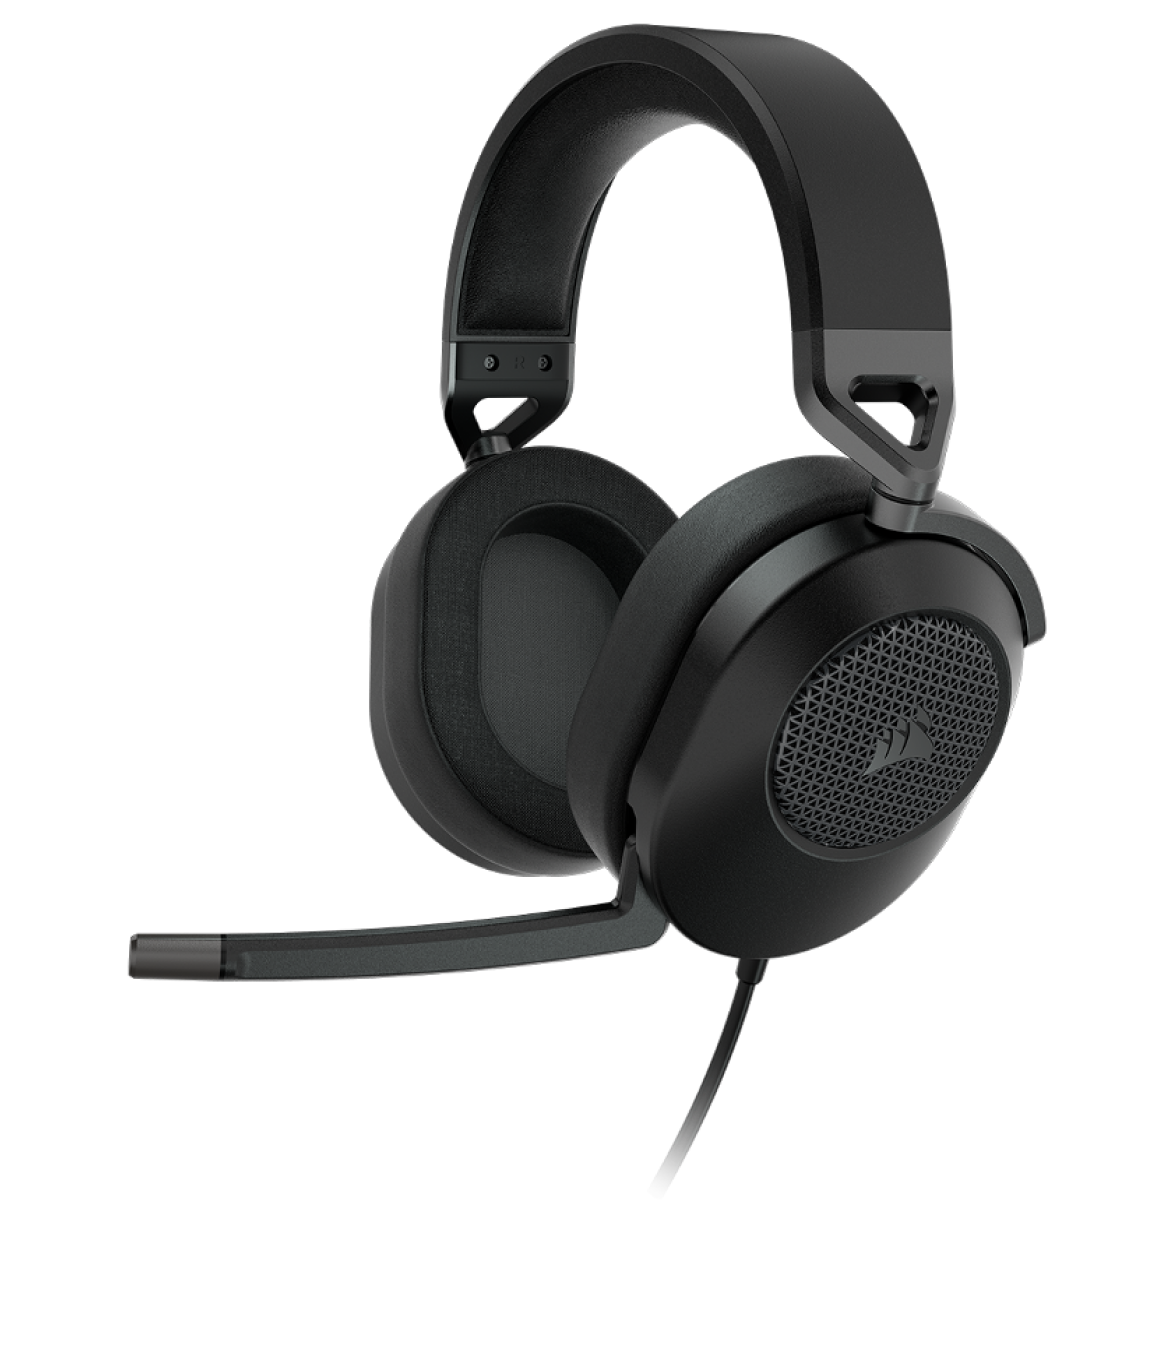 HS65 SURROUND wired gaming headset with visualization of 7.1 surround audio. 